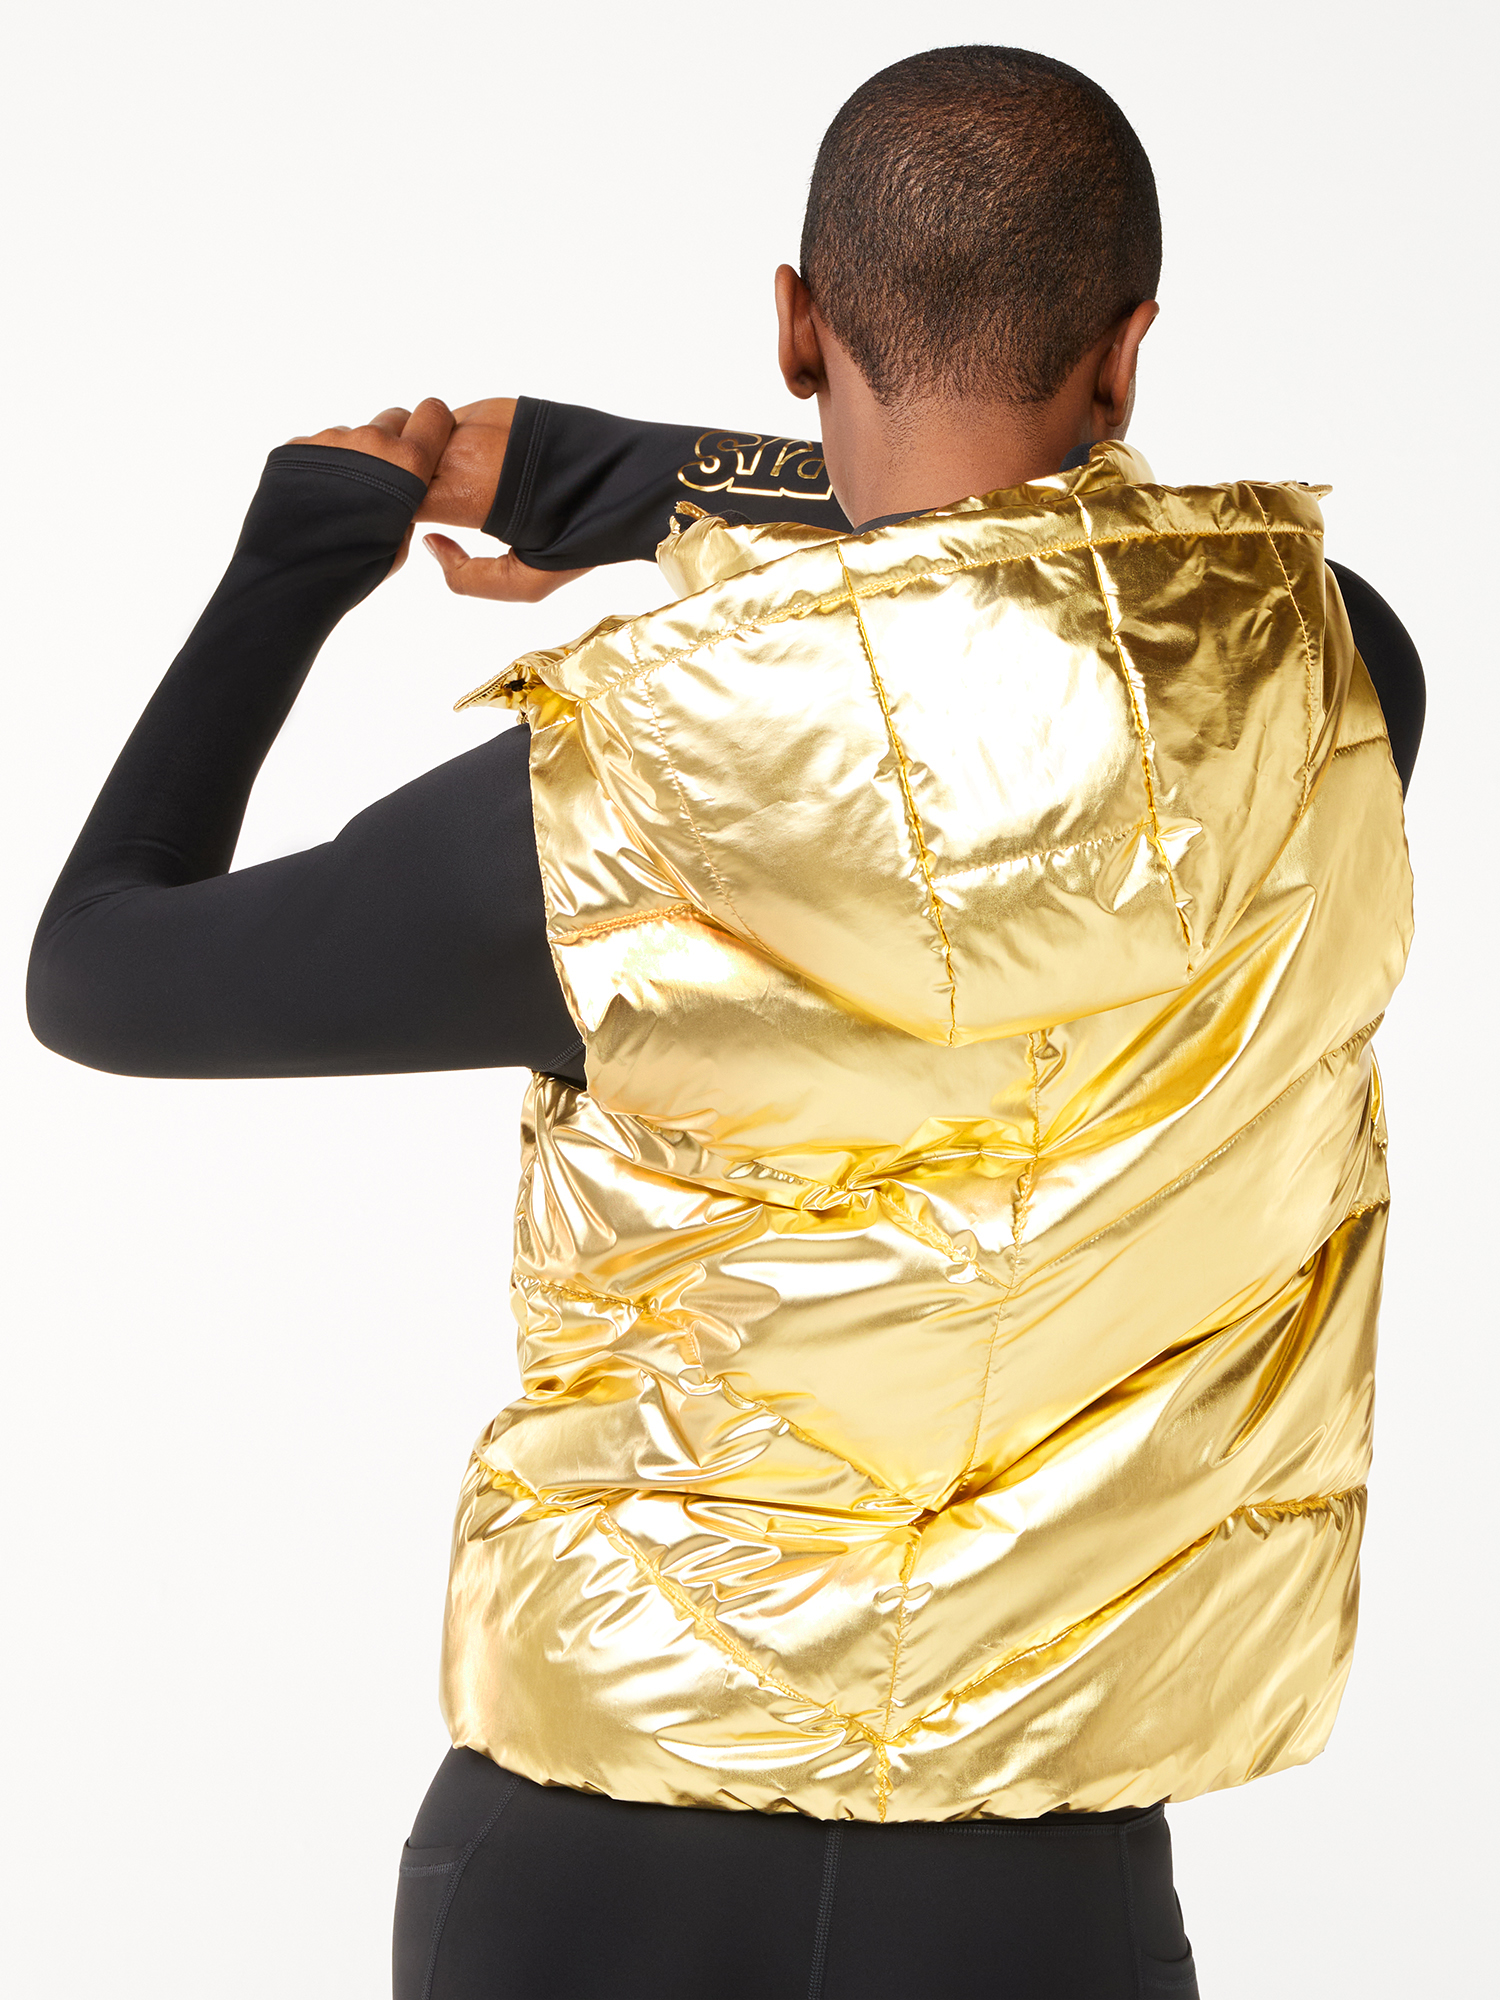 Love & Sports Women's Gold Foil Puffer Vest with Hood - image 4 of 7